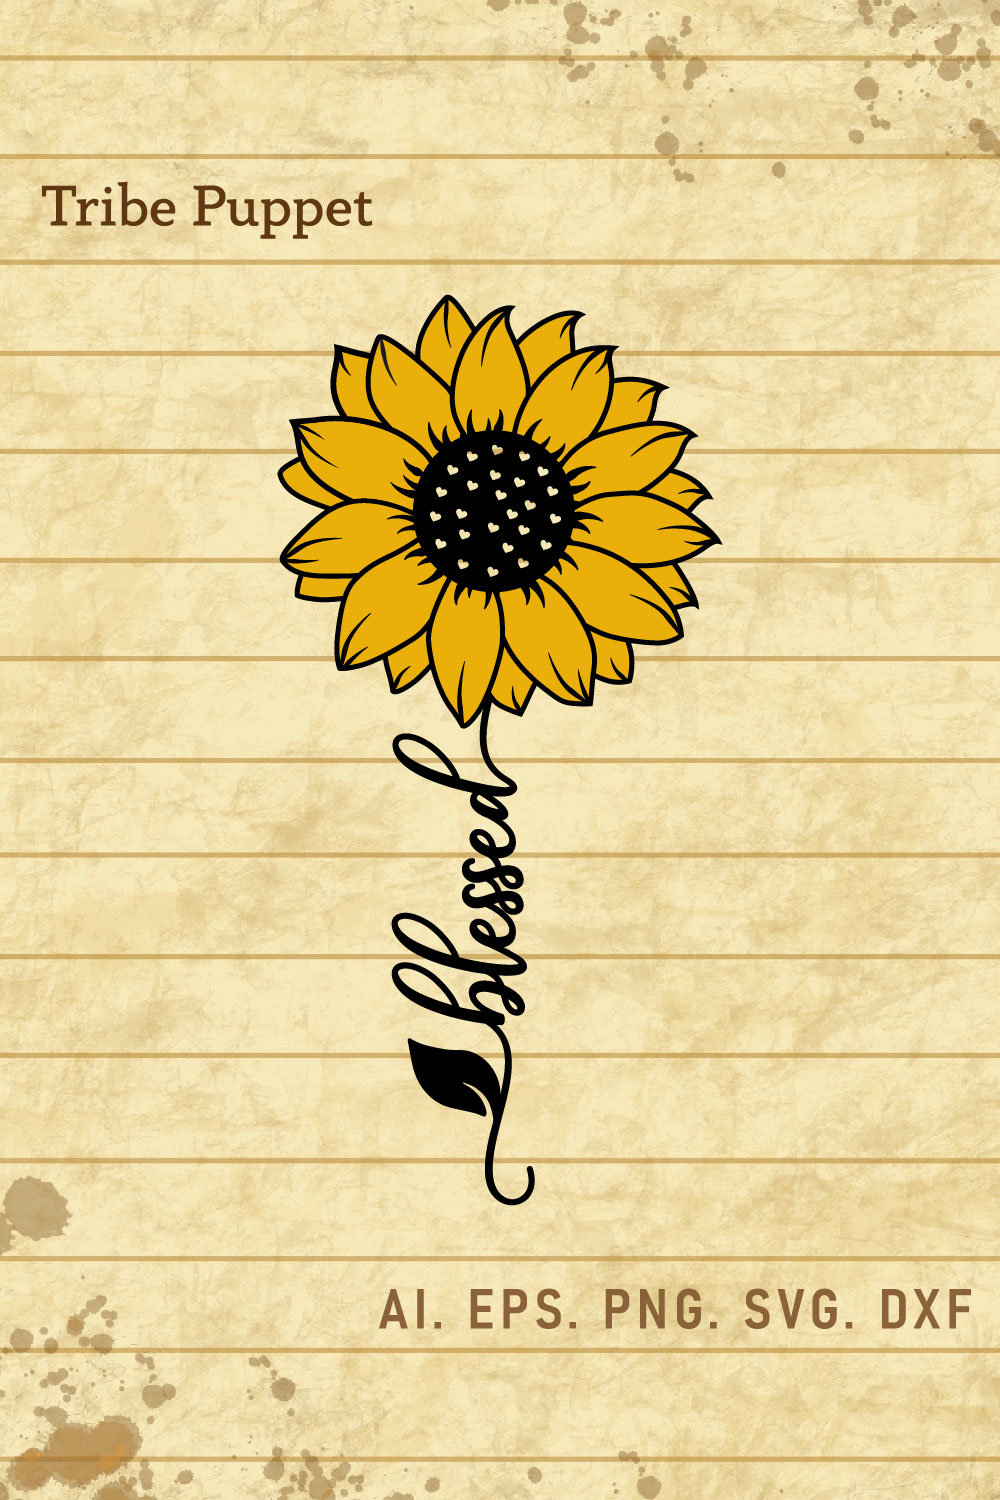 Sunflower 01 pinterest preview image.